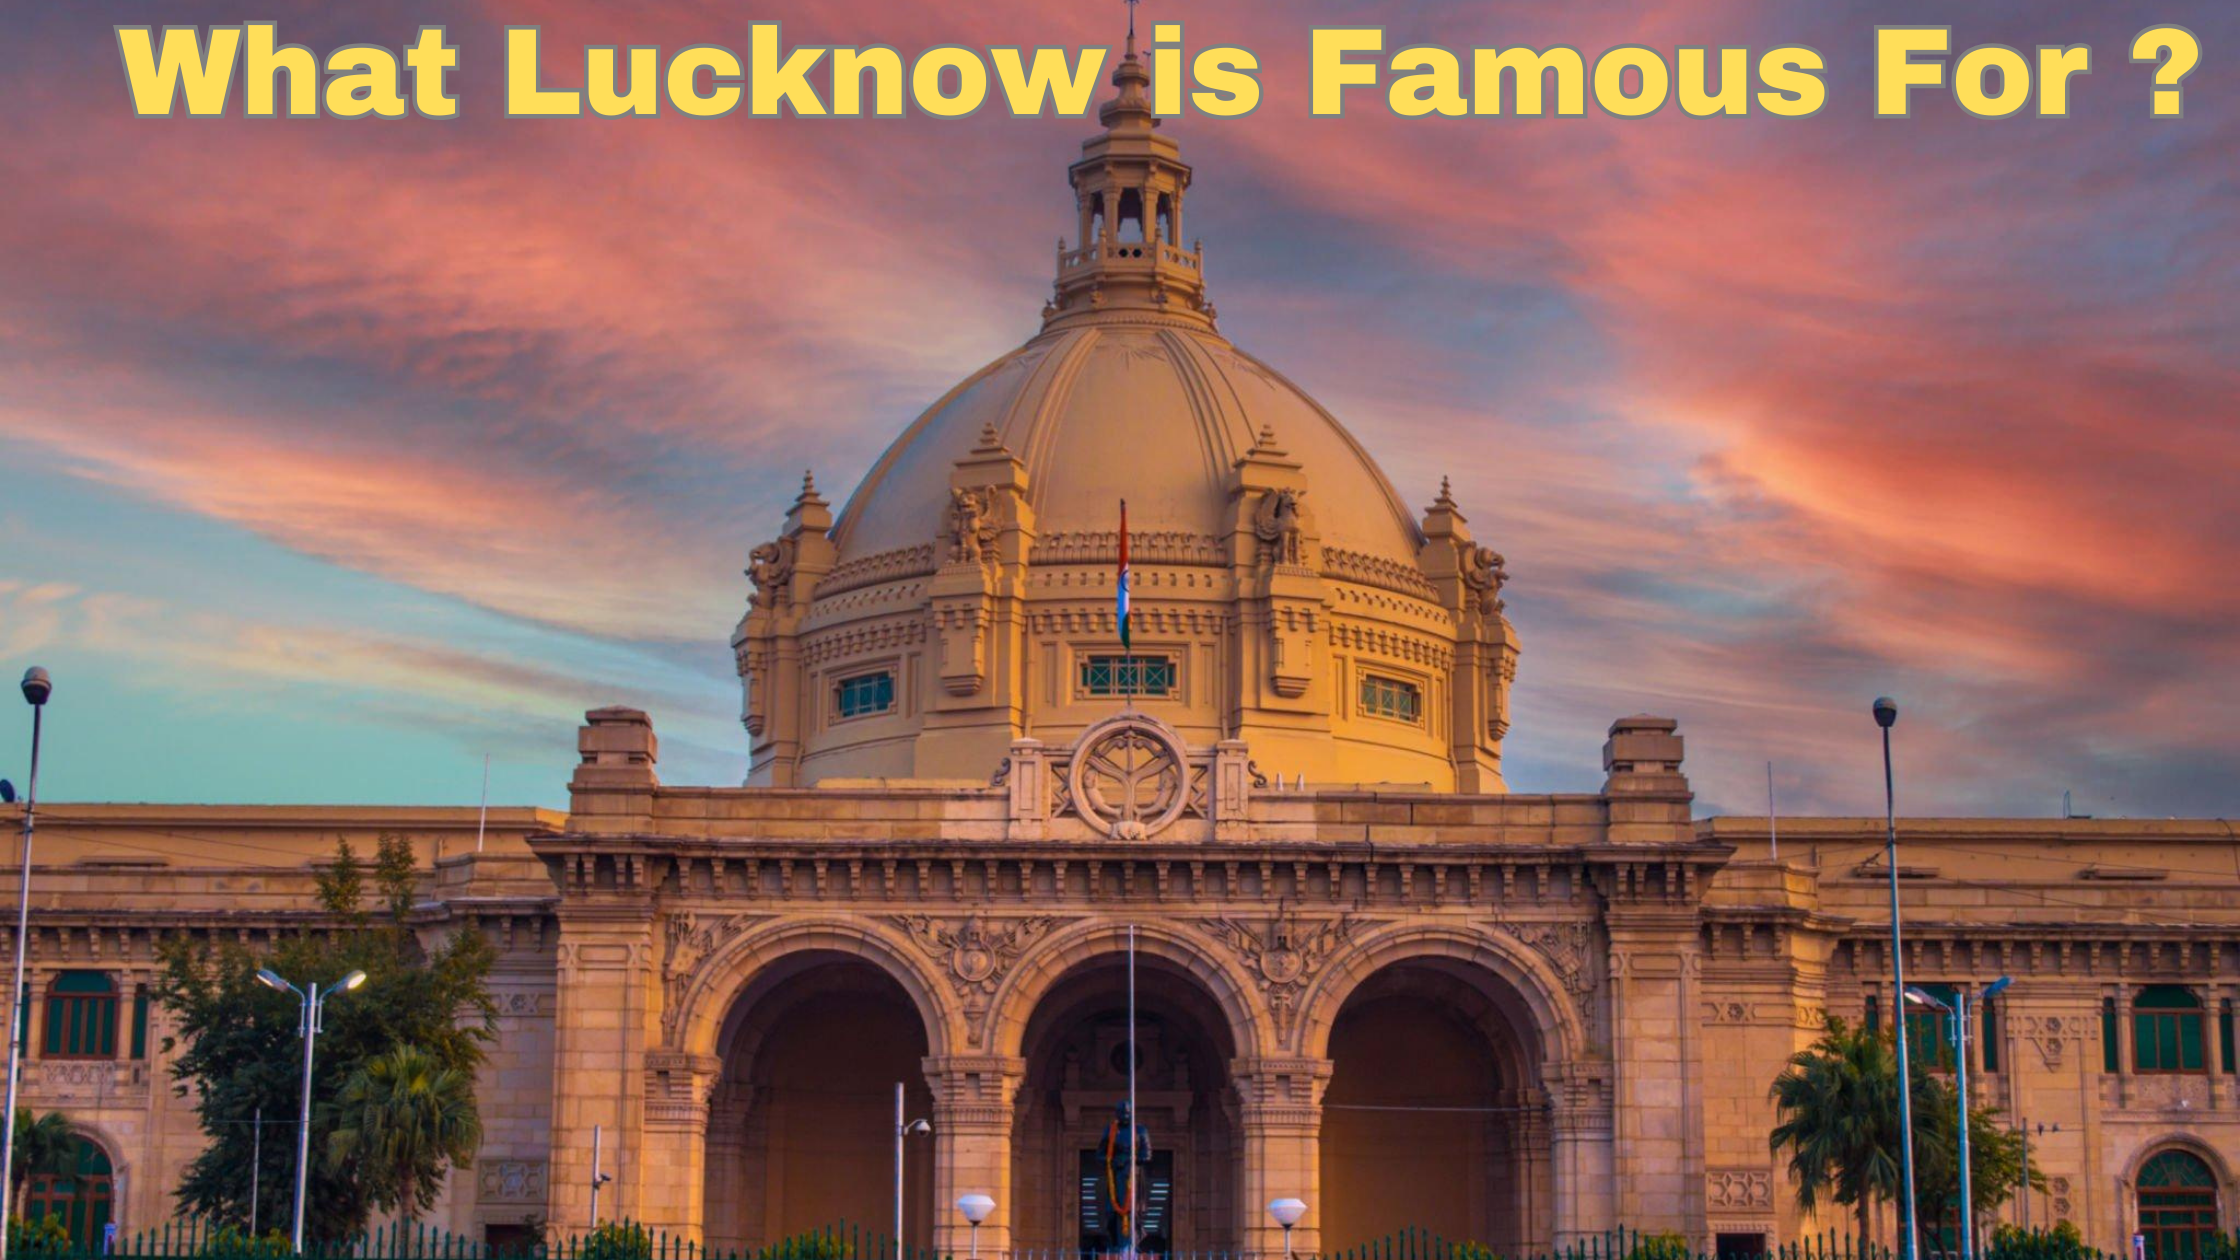 What Lucknow is Famous For